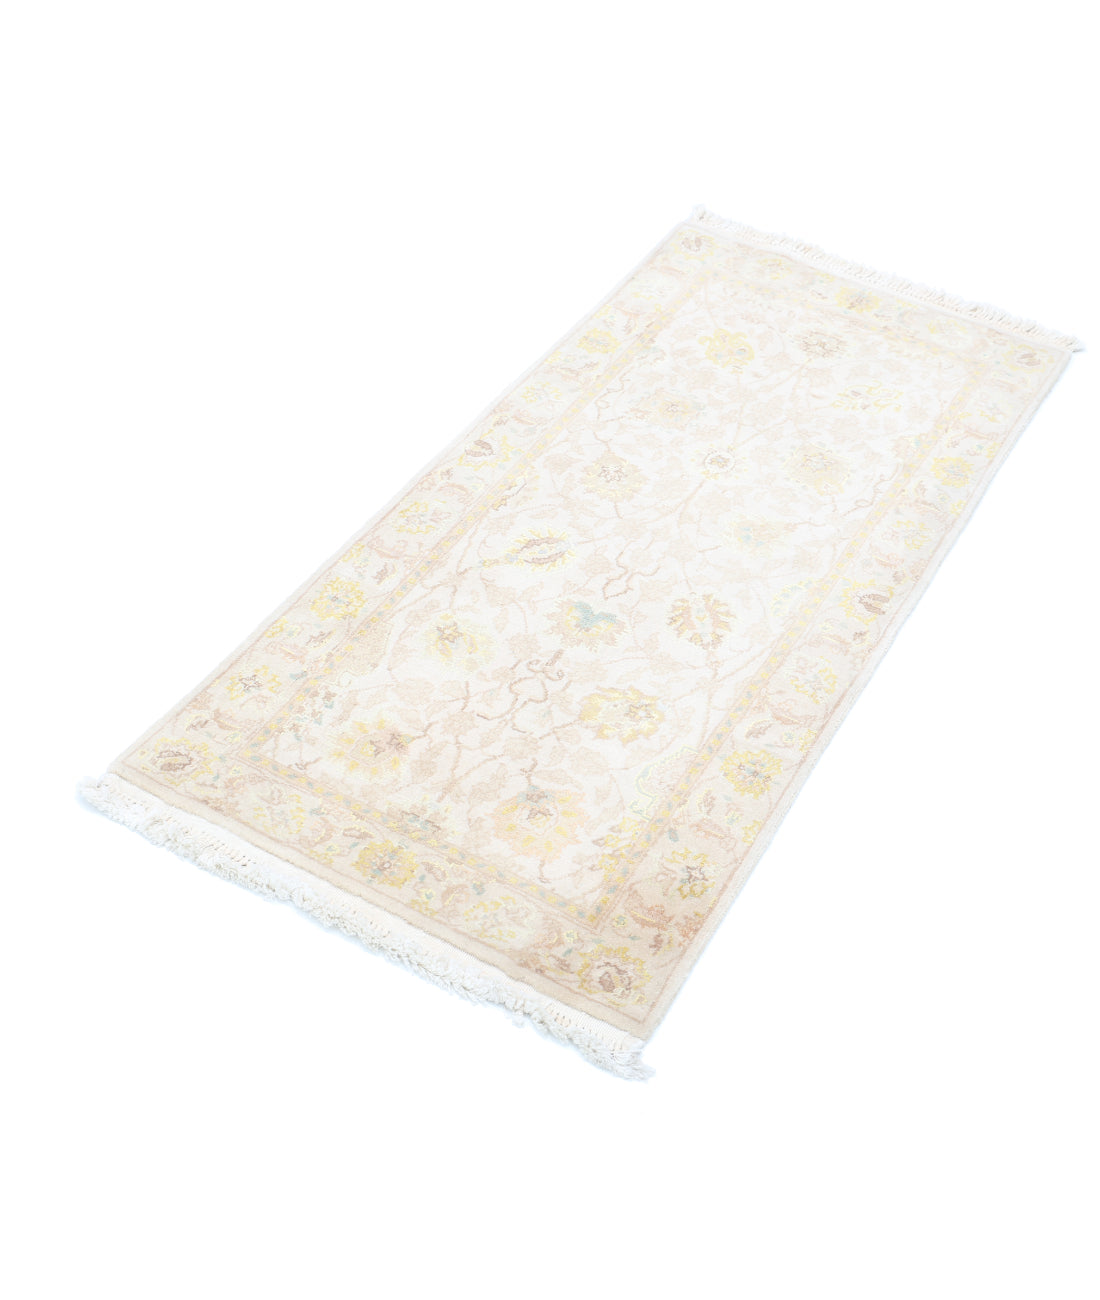 Hand Knotted Agra Kashan Wool Rug - 2'0'' x 4'1'' 2'0'' x 4'1'' (263 X 355) / Ivory / Gold